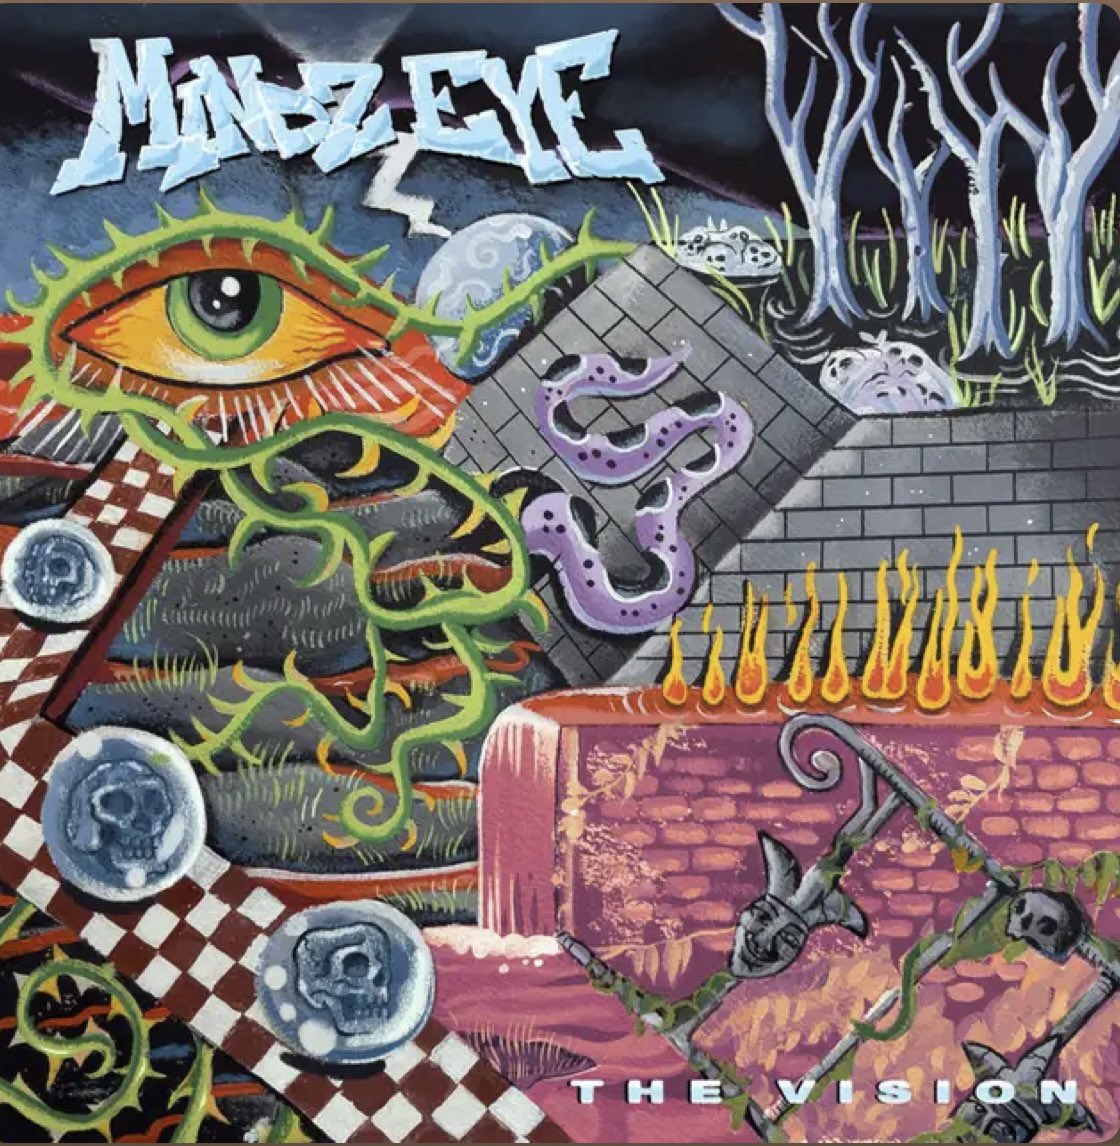 good music friday - MINDZ EYE new record “The Vision”has been getting a ton of spin time this week. absolute banger.